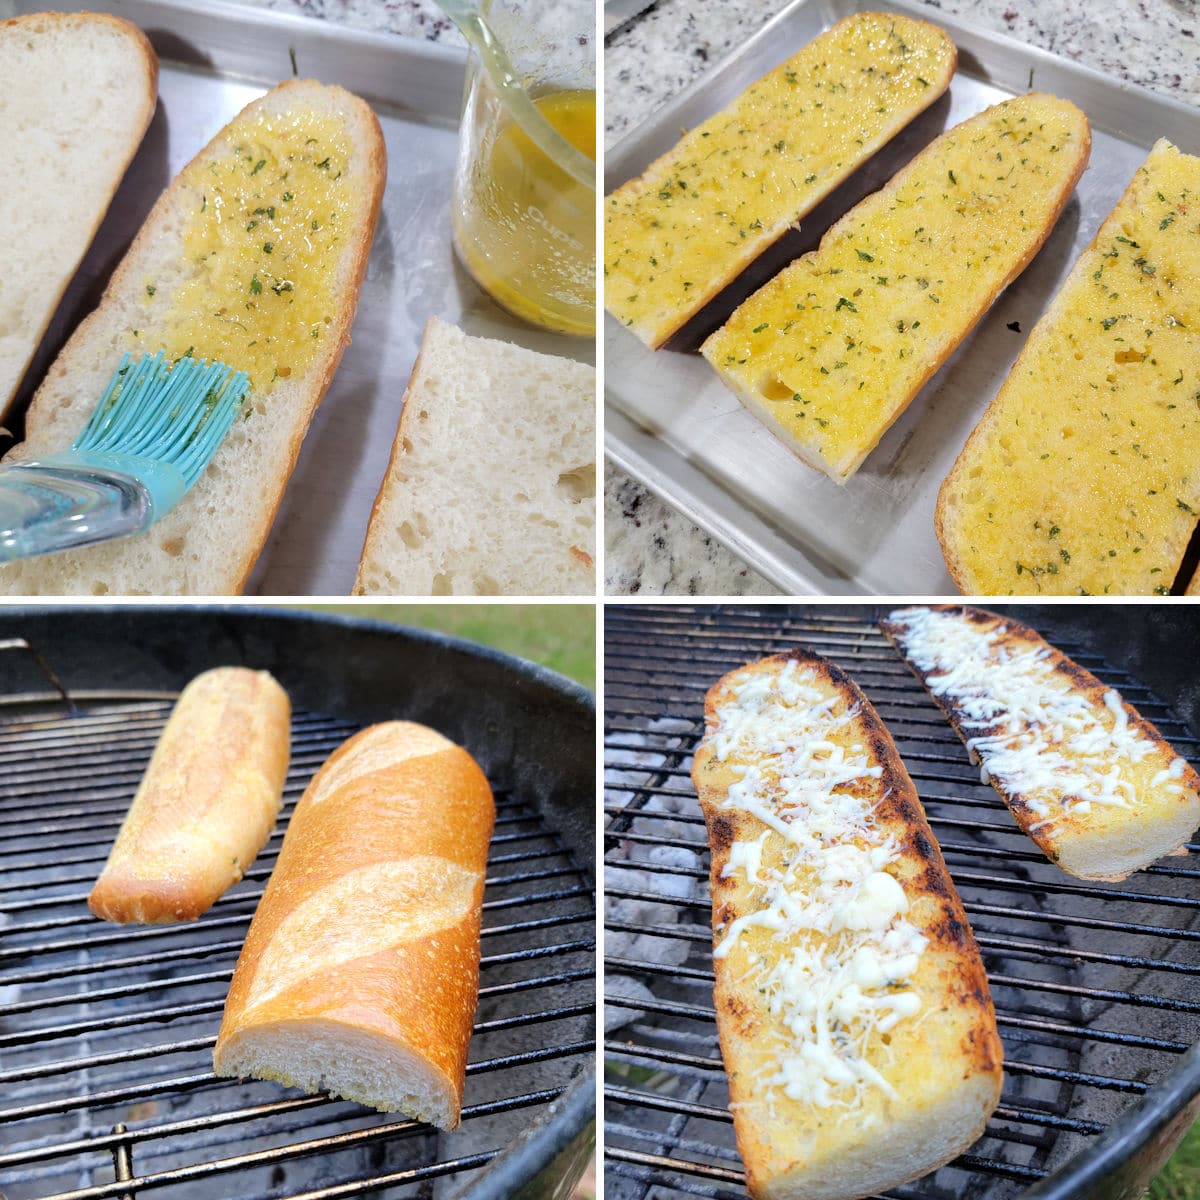 Brushing bread with melted butter and cooking on the grill.